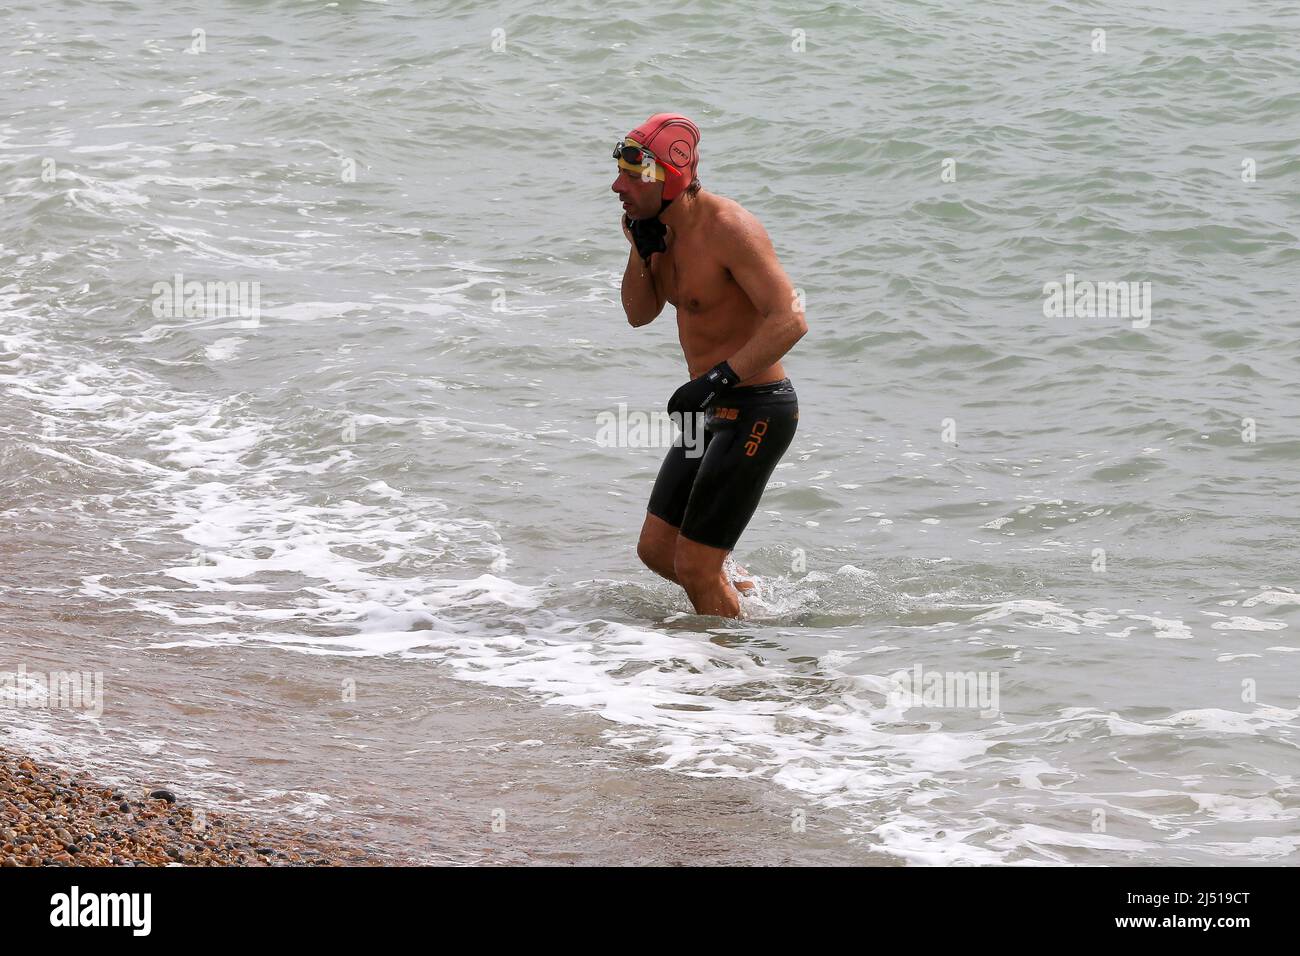 Brighton. UK 18 Apr 2022 - A swimmer returns after his swim in the sea on the Brighton seafront as the mini-heatwave is set to end with light showers and temperatures of around 13 degrees Celsius. Credit Dinendra Haria /Alamy Live News Stock Photo